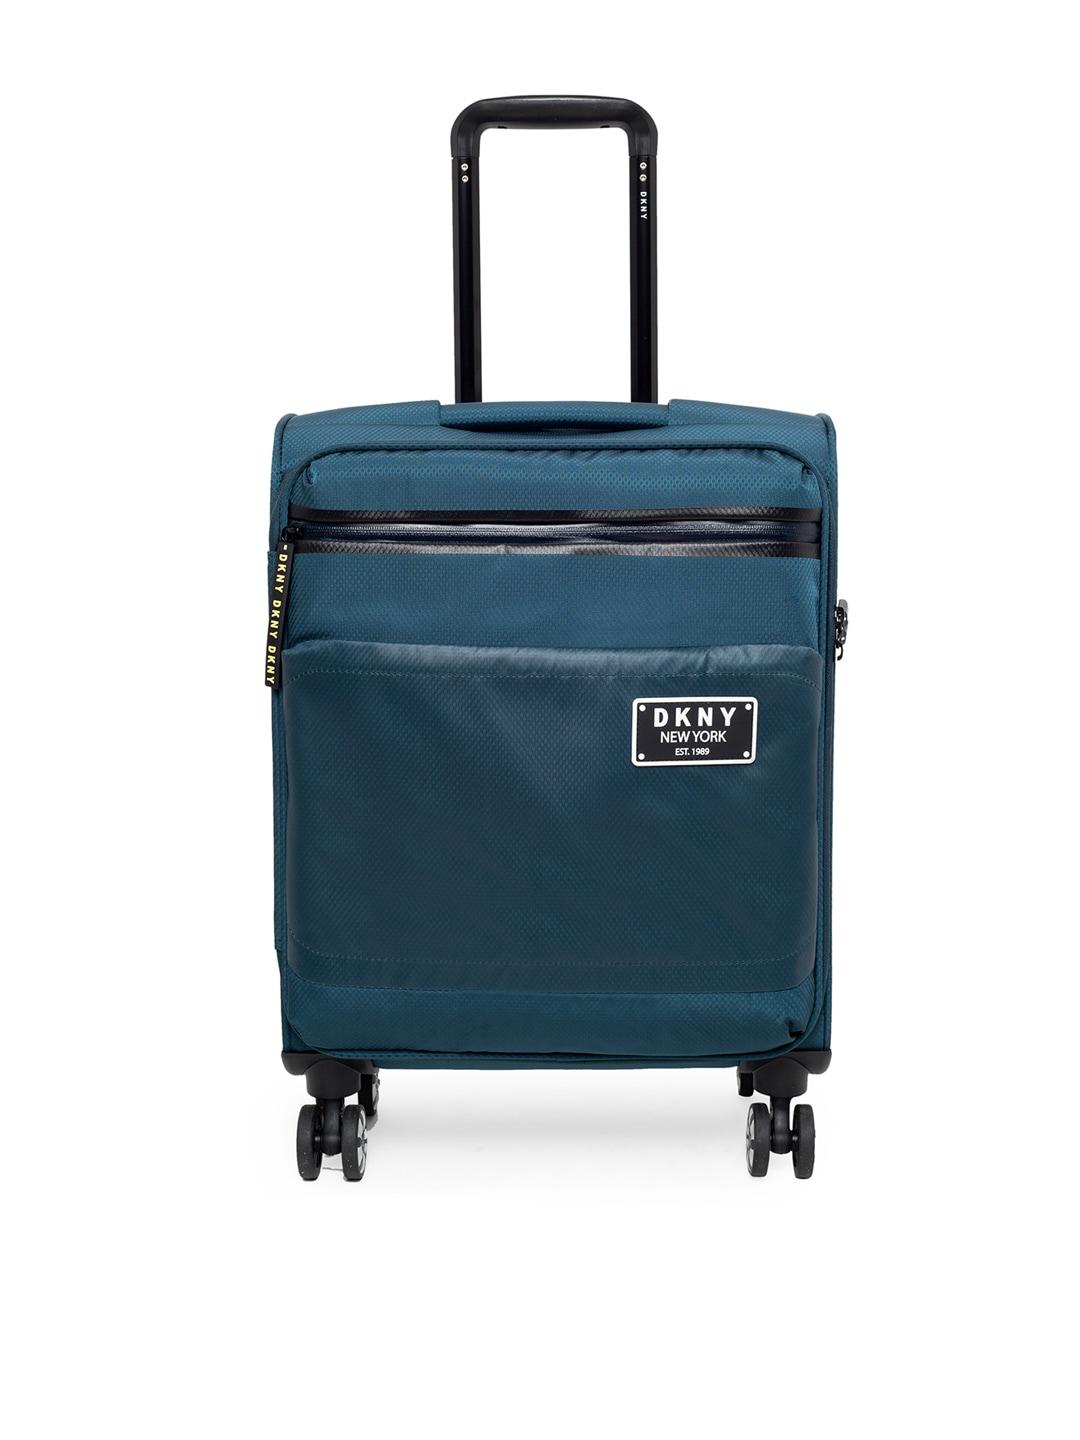 dkny-teal-blue-solid-globe-trotter-soft-sided-cabin-trolley-suitcase